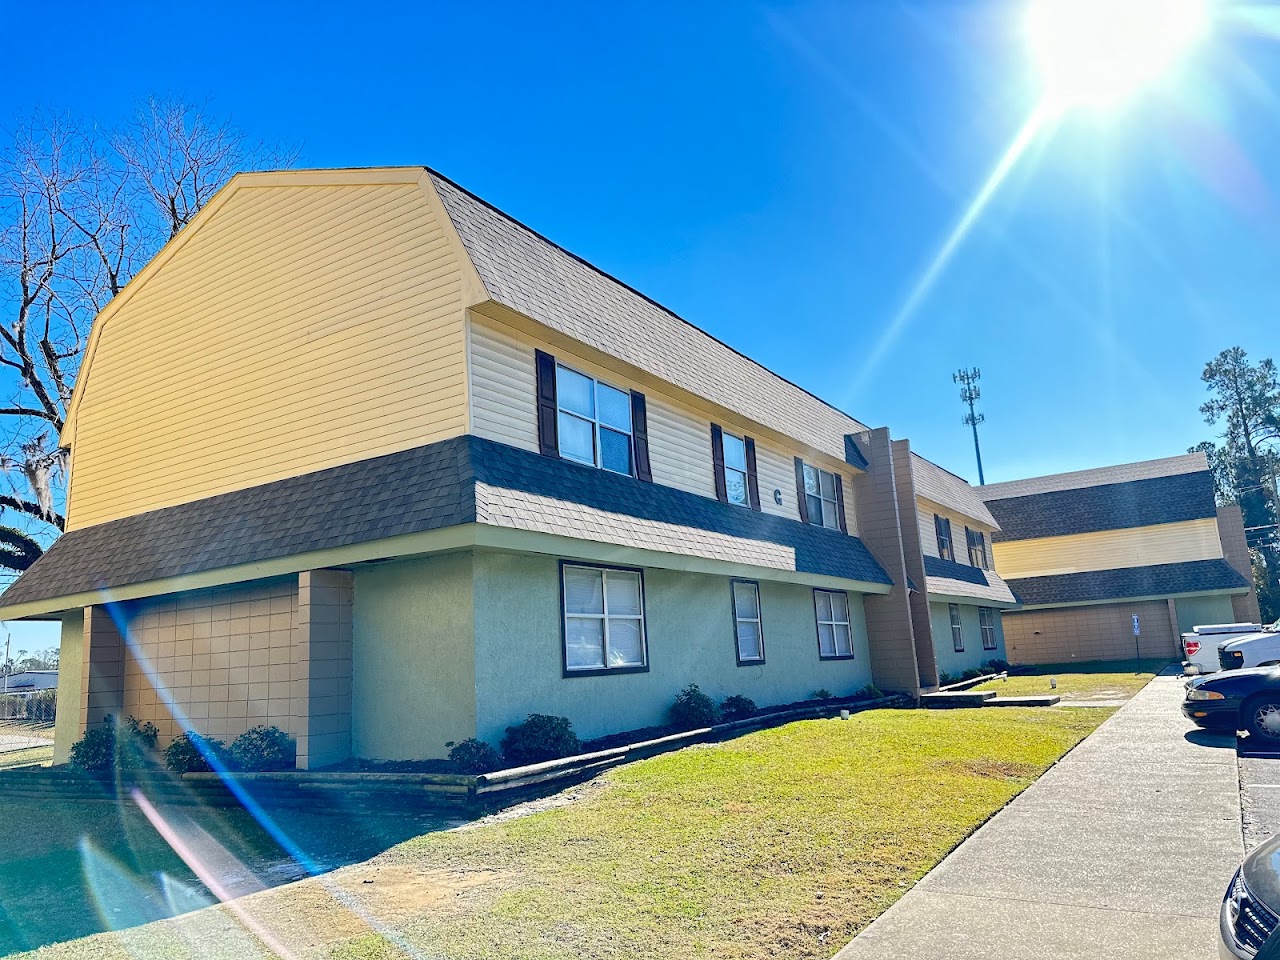 Photo of INTERFAITH APTS. Affordable housing located at 825 TOMLINSON ST KINGSTREE, SC 29556